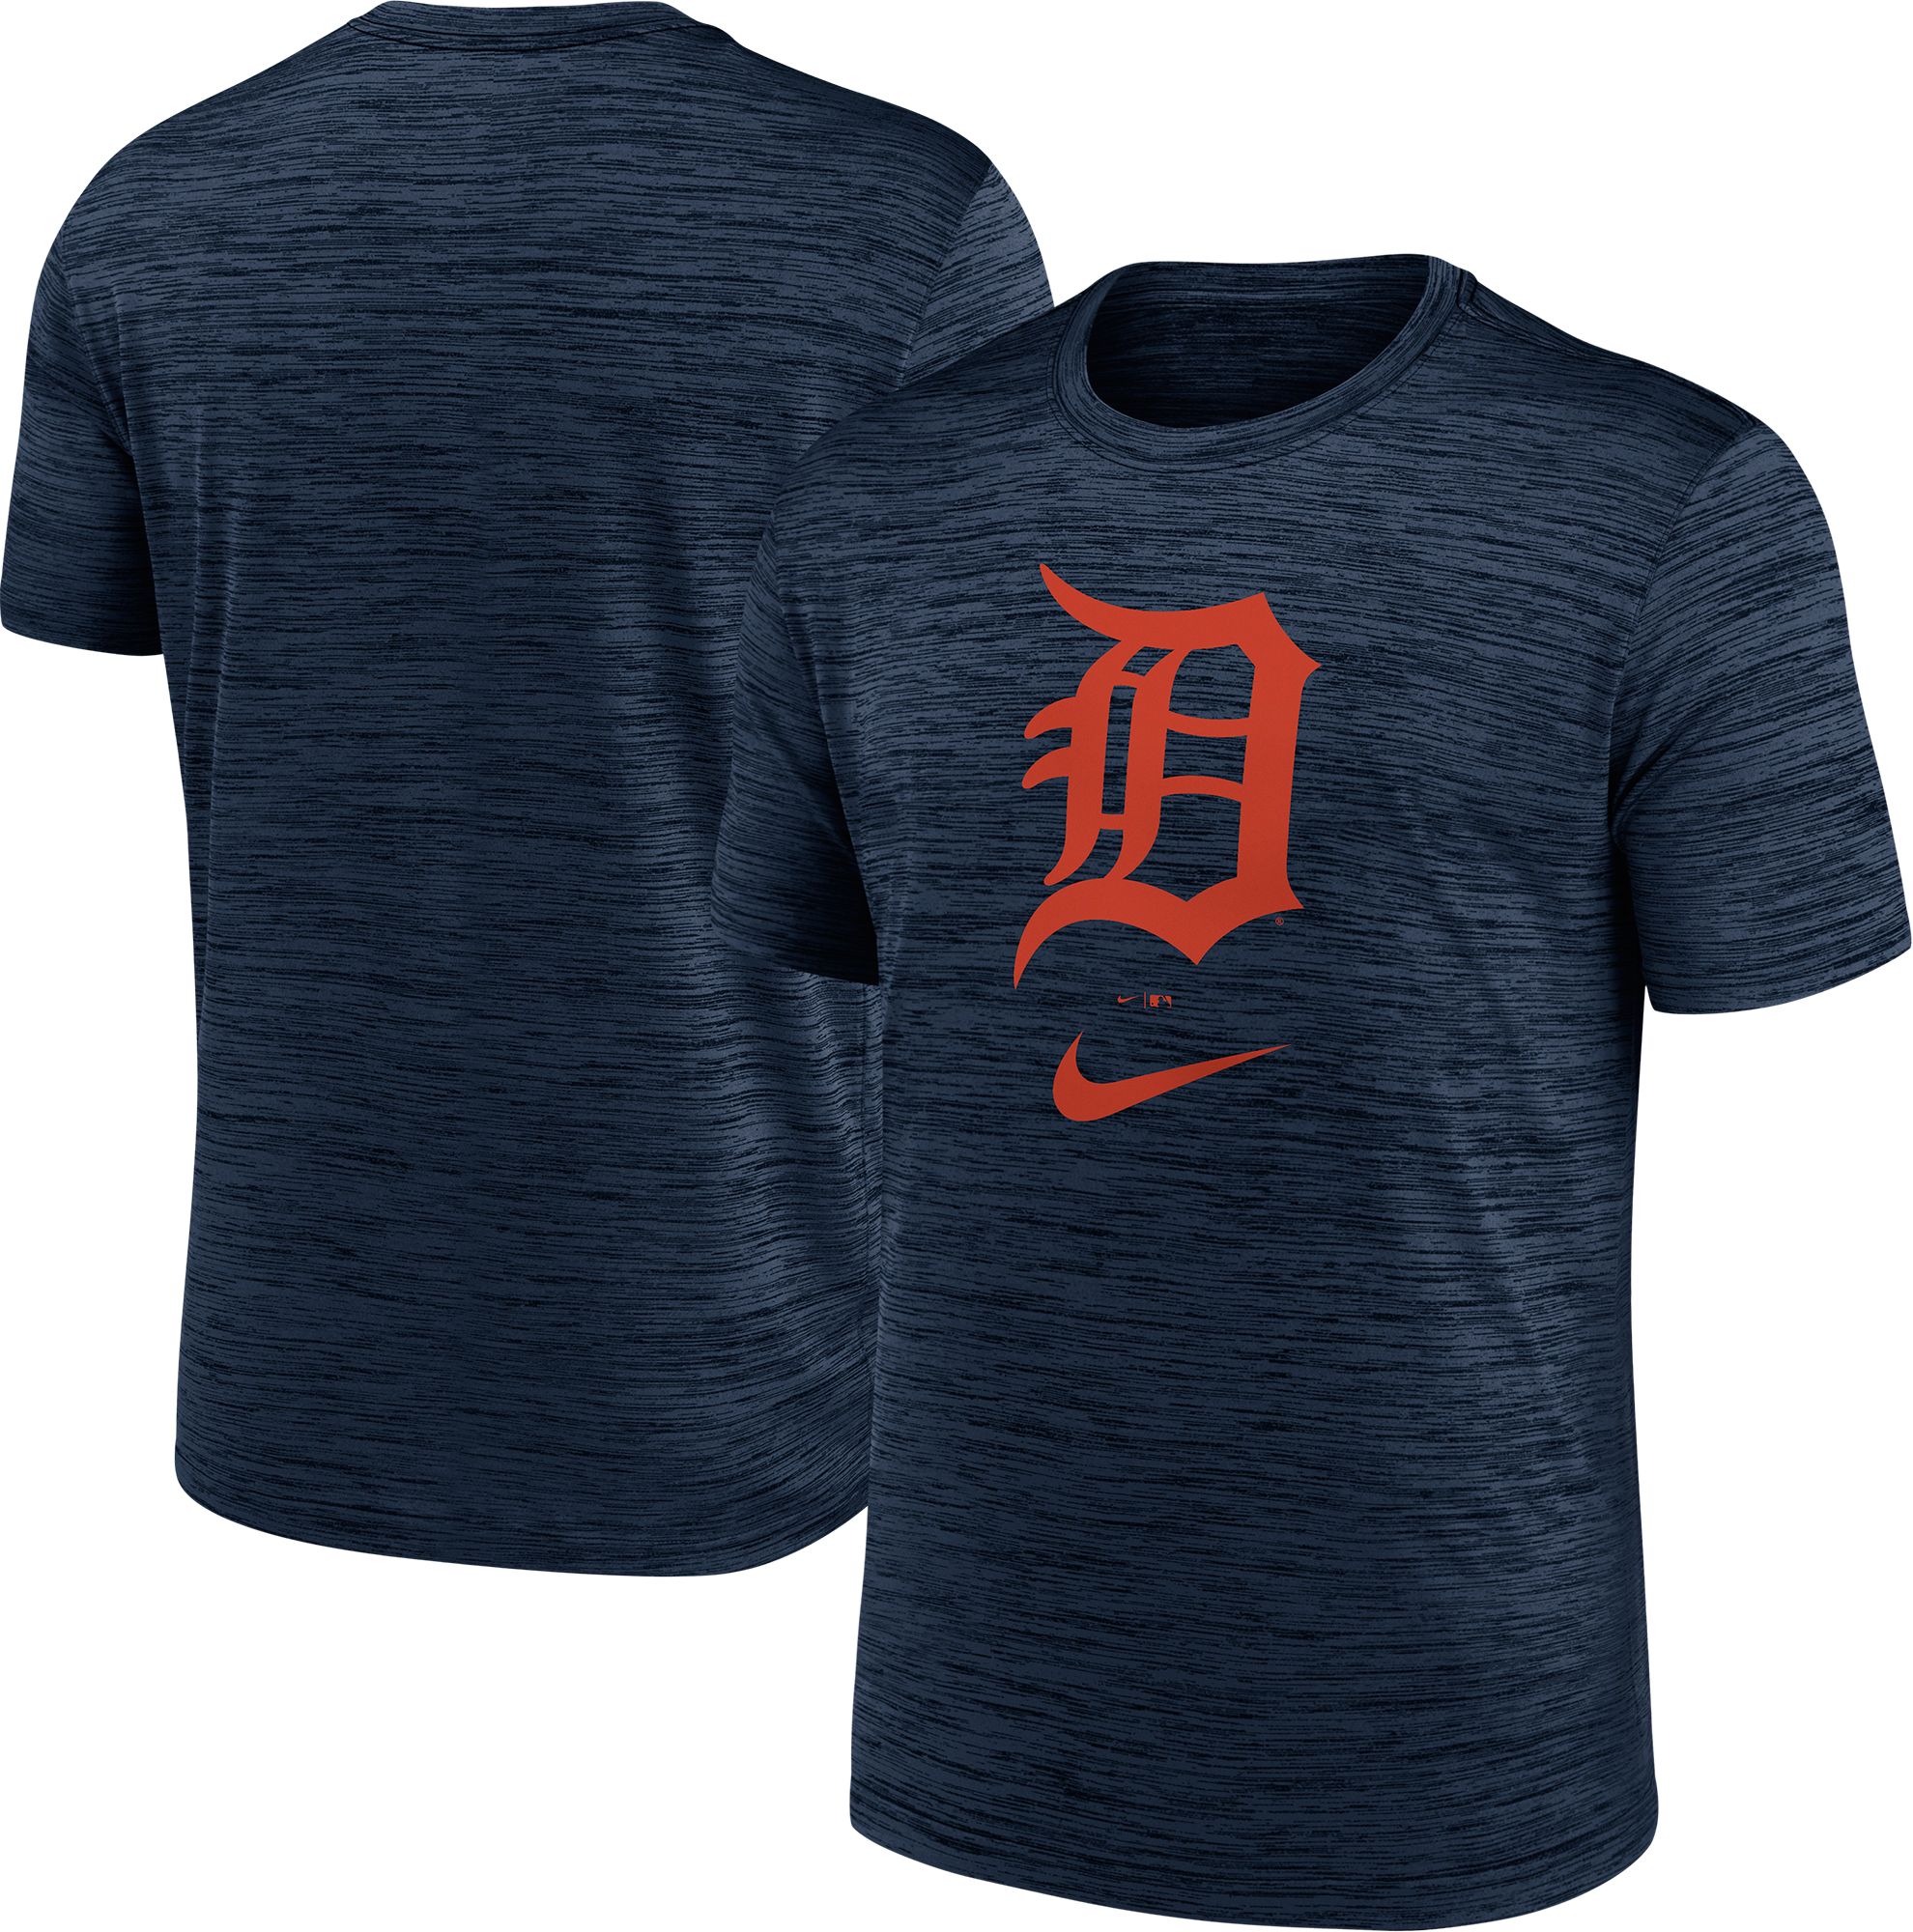 Cabrera #24 Detroit Tigers Men's Nike Home Replica Jersey by Vintage Detroit Collection